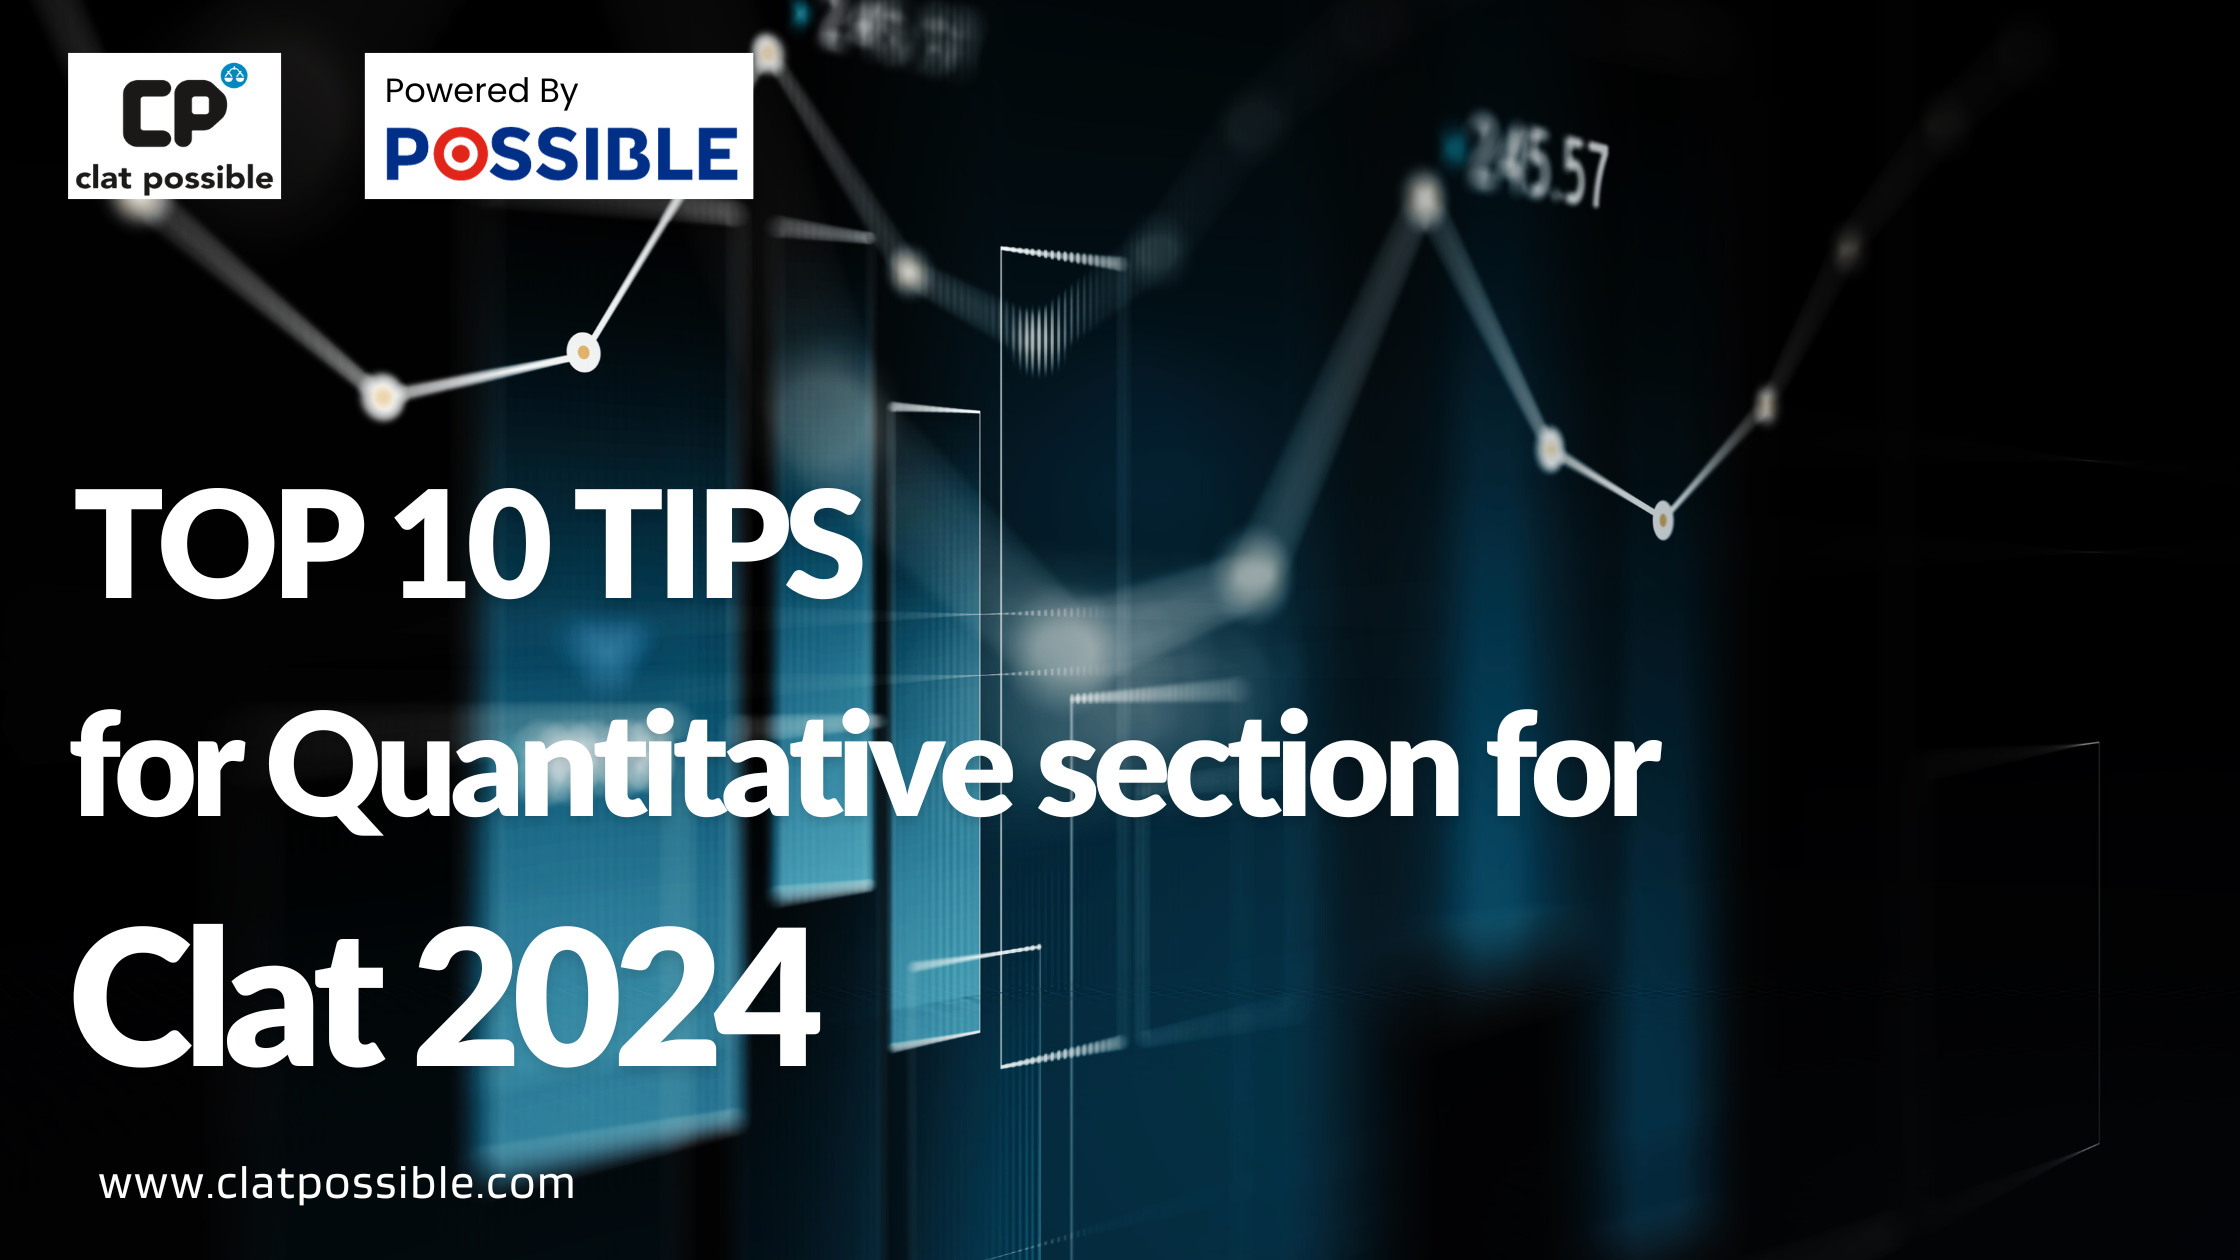 10 tips for Quantitative section for Clat 2024